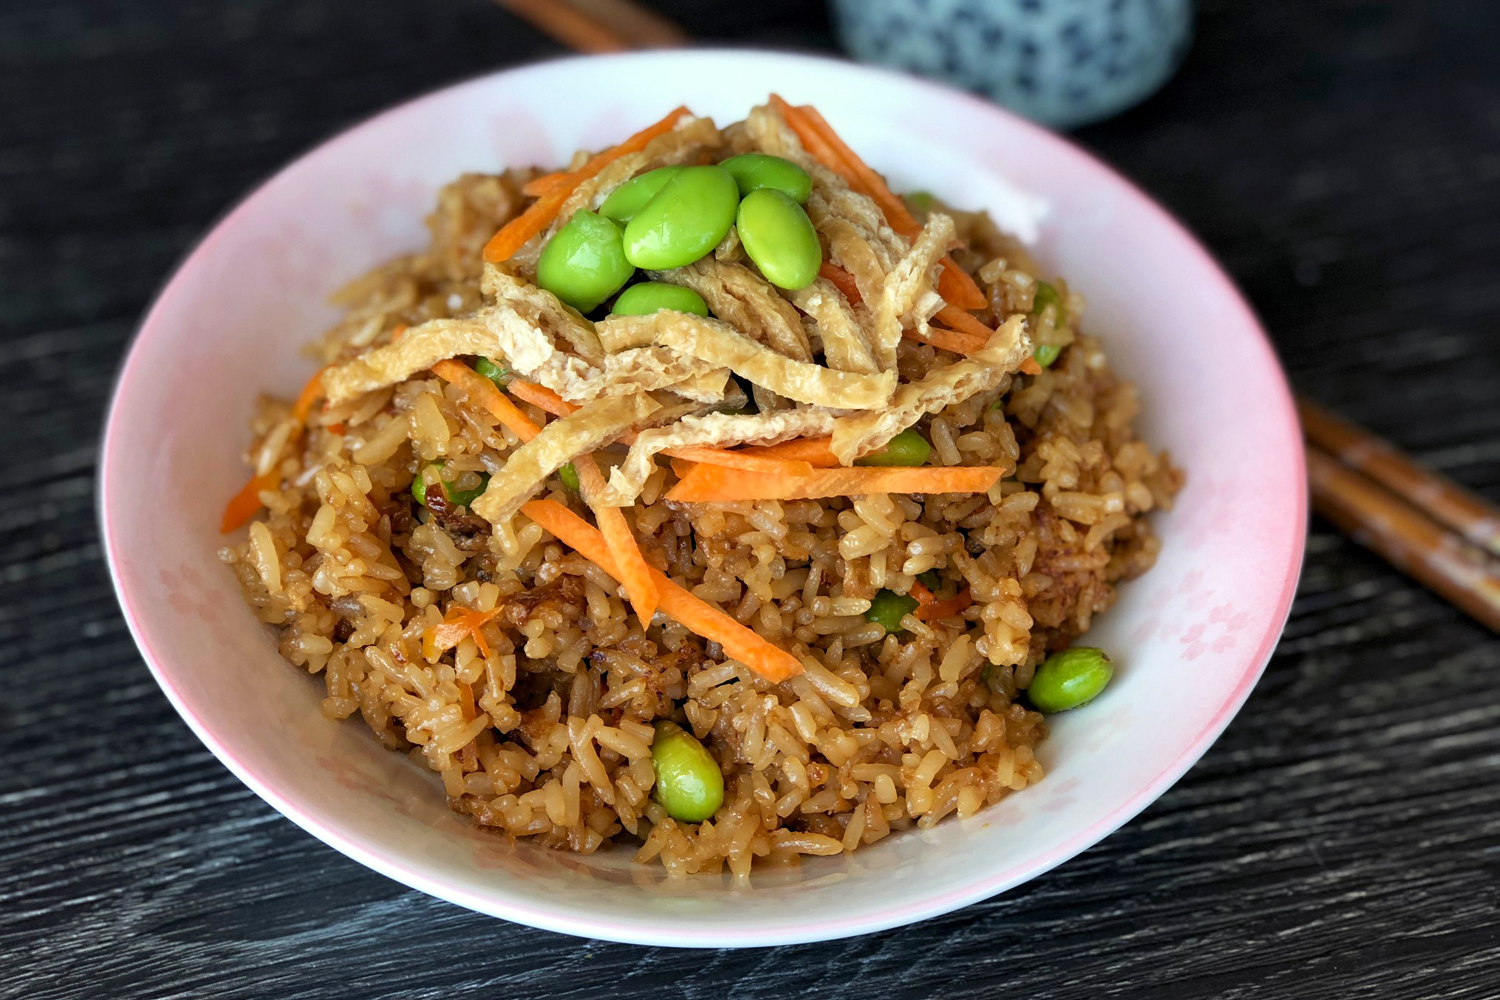 Japanese Fried Rice with Edamame and Fried Tofu | Asian Inspirations